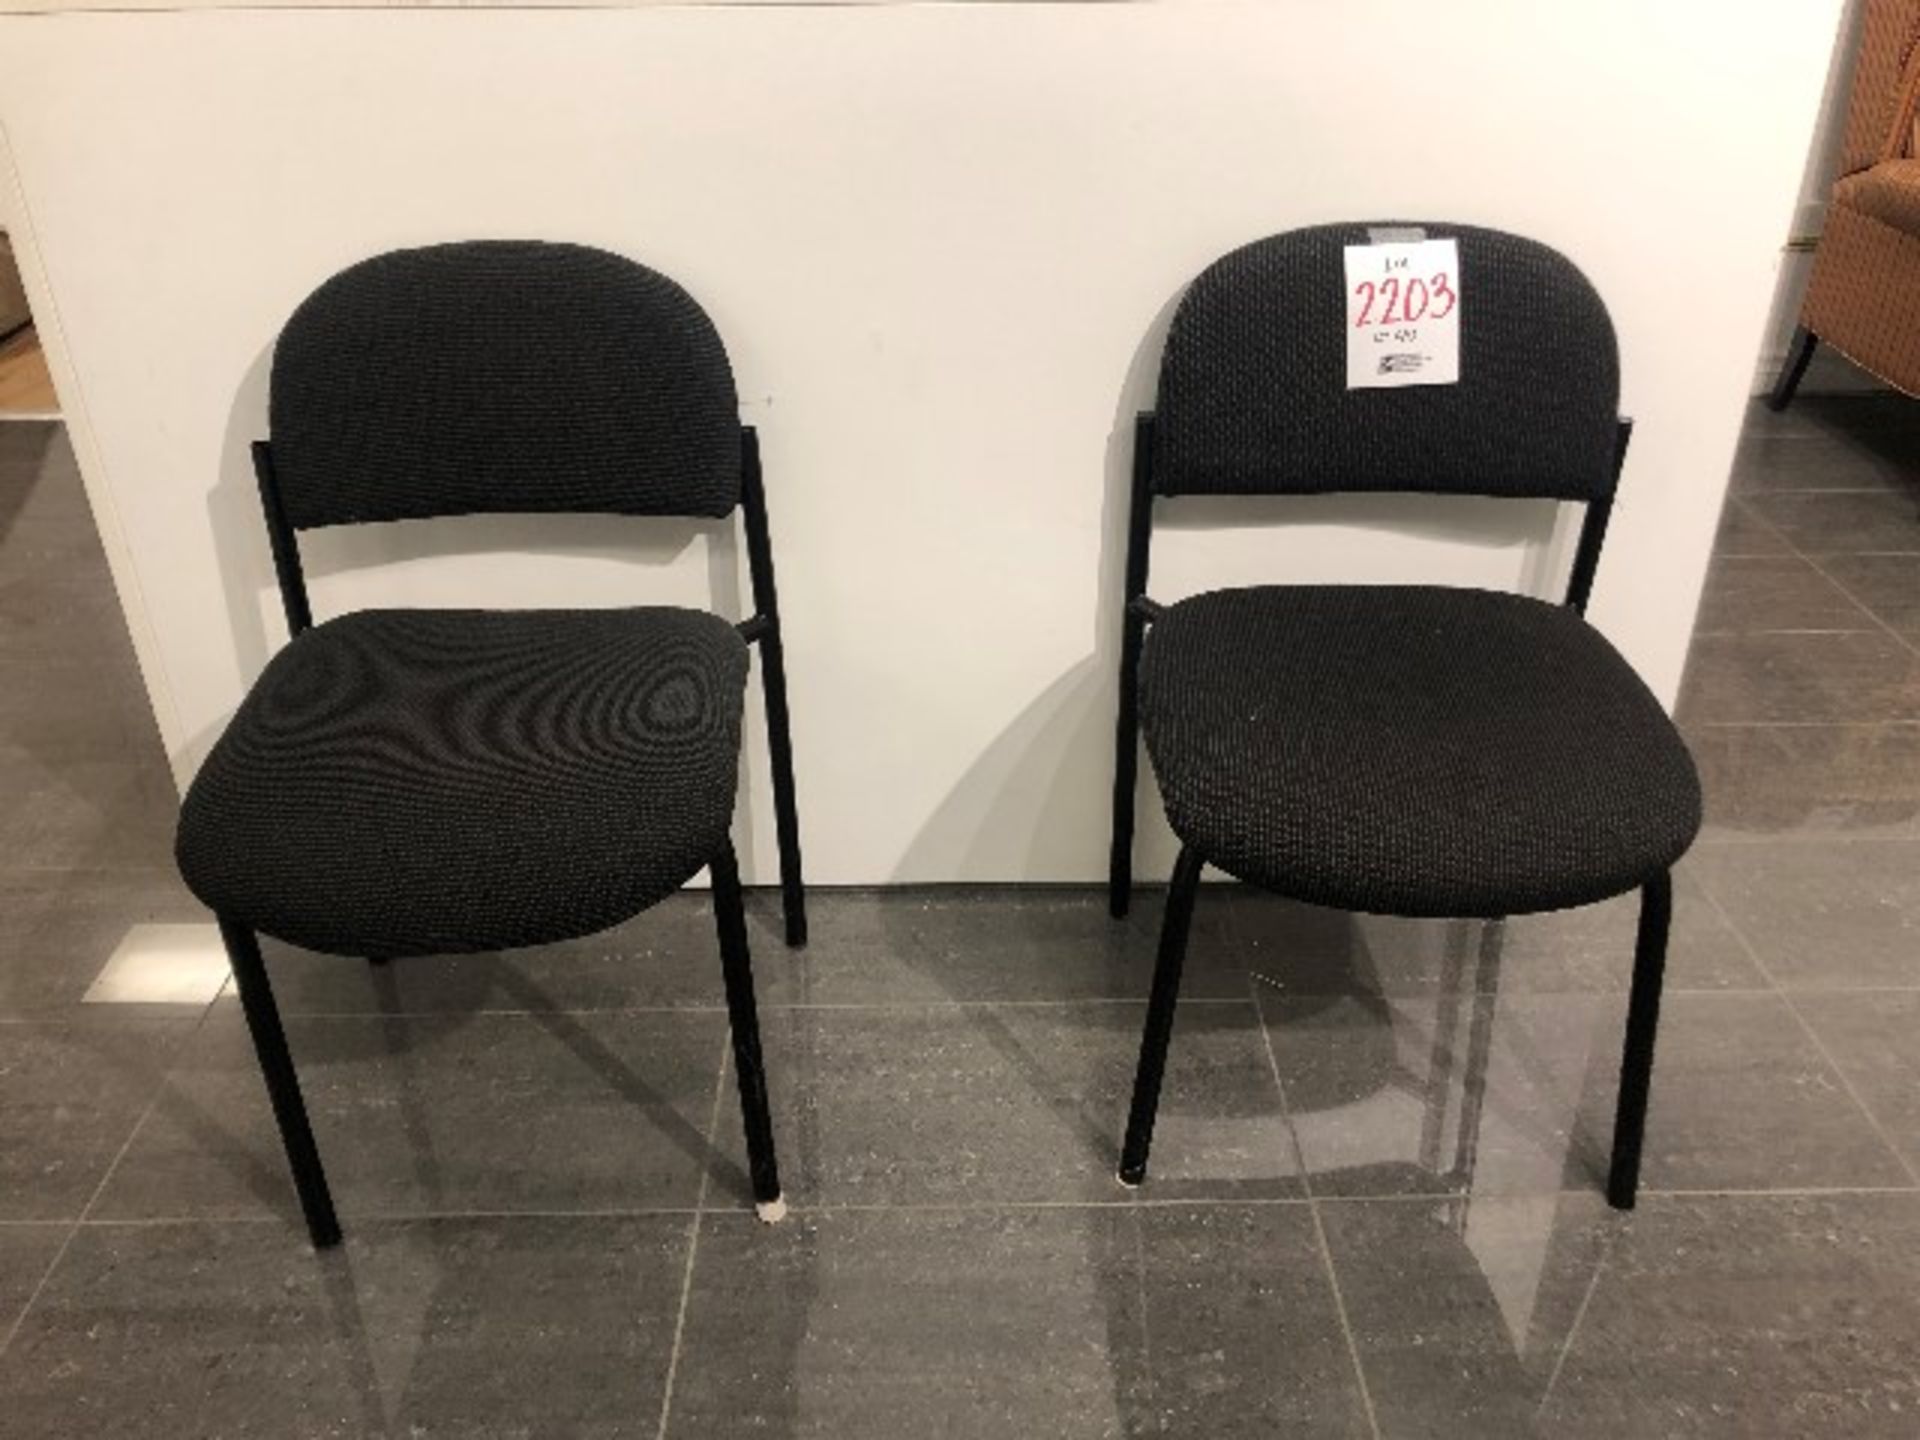 Visitor chairs, 2 pcs (Lot)